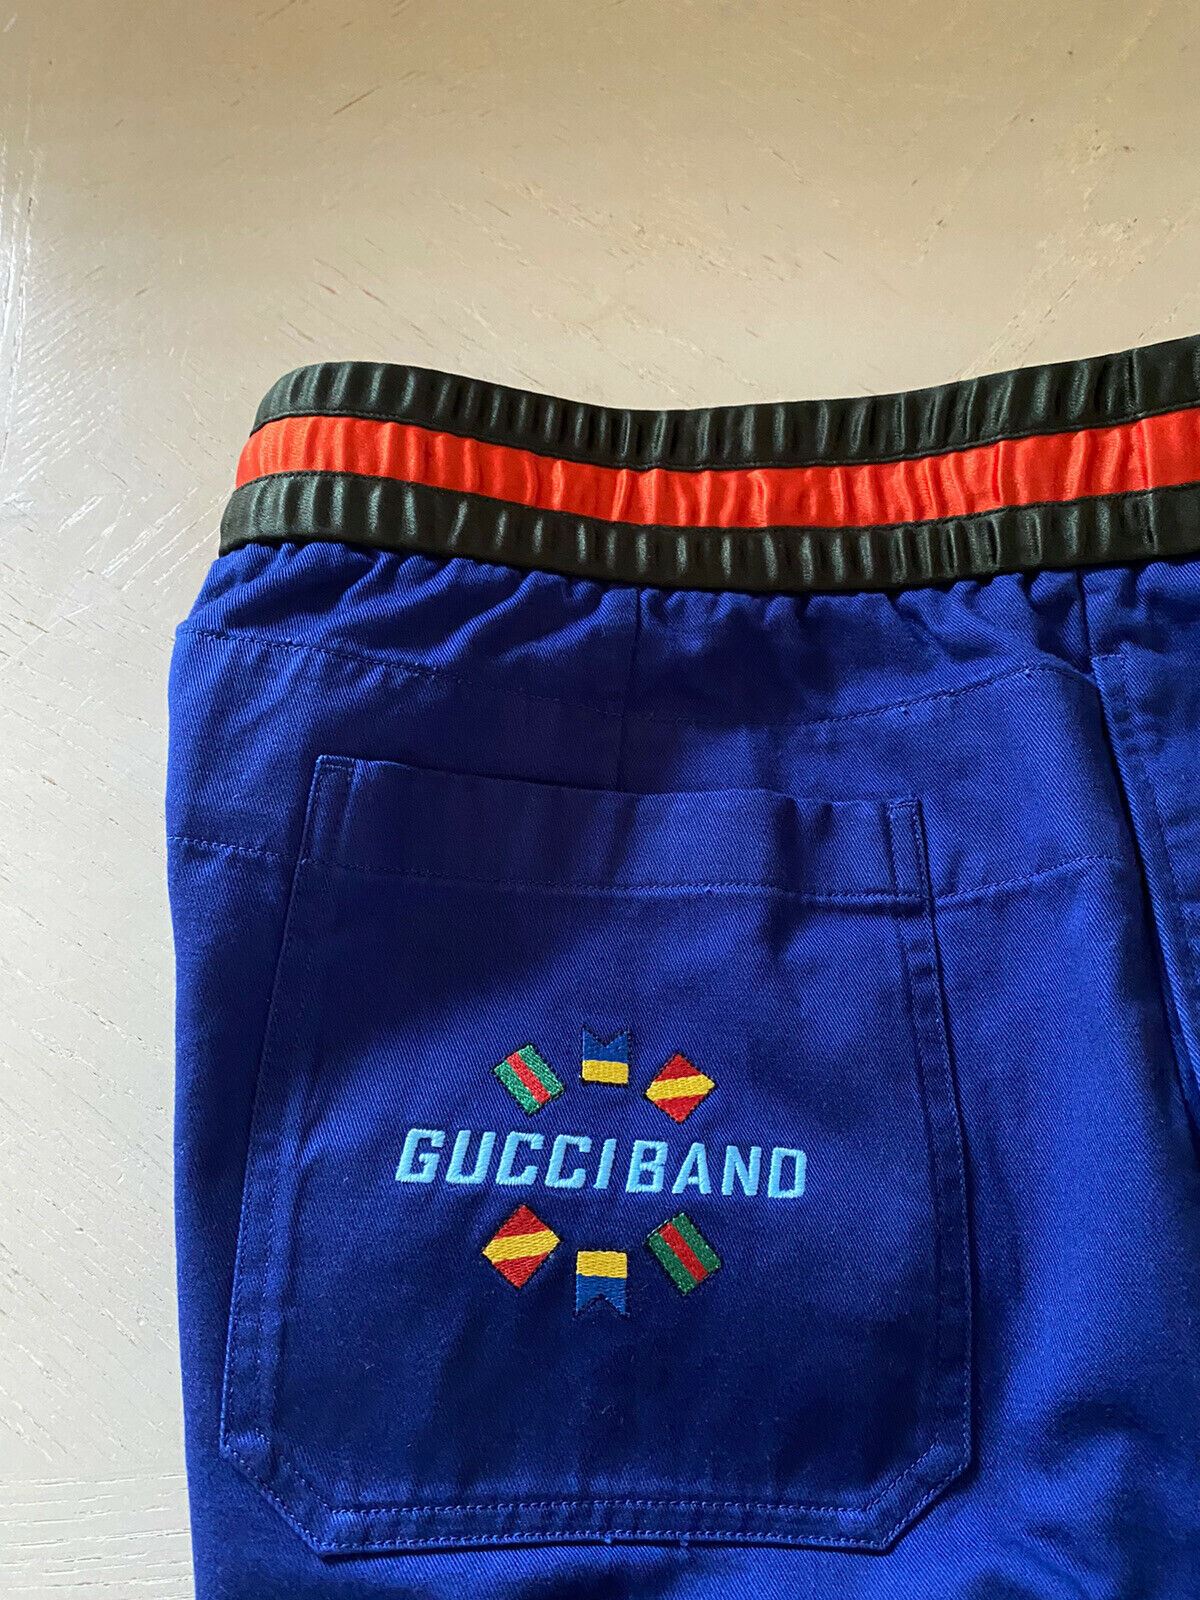 New $980 Gucci Men Gucci Band Jegging  Pants Blue 34 US ( 50 Eu ) Made in Italy